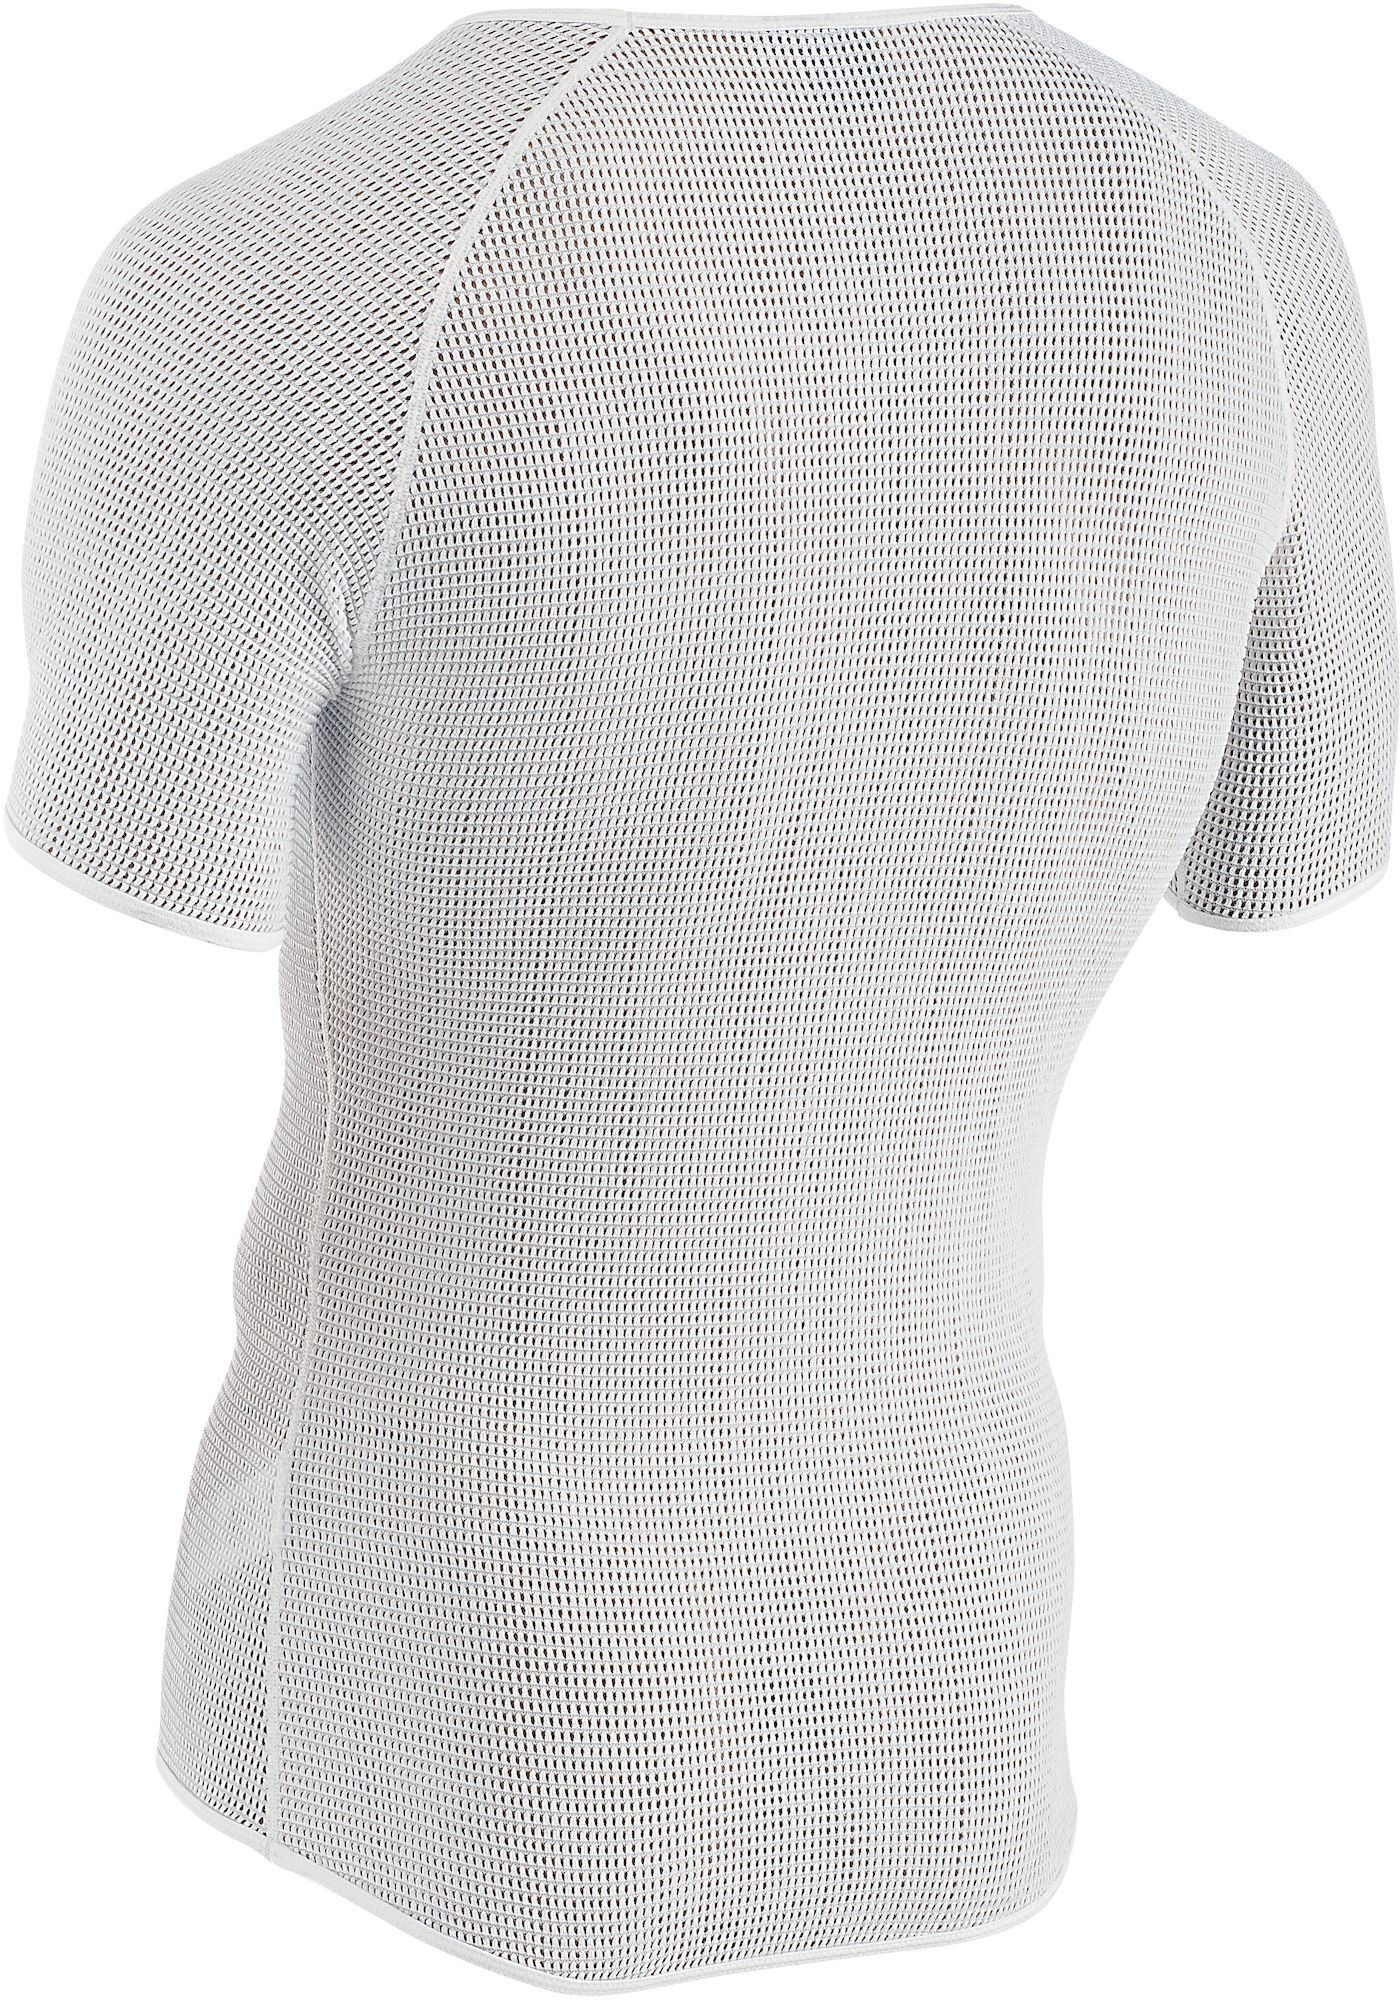 Northwave Light Jersey Short Sleeve - Cycling base layers | Hardloop